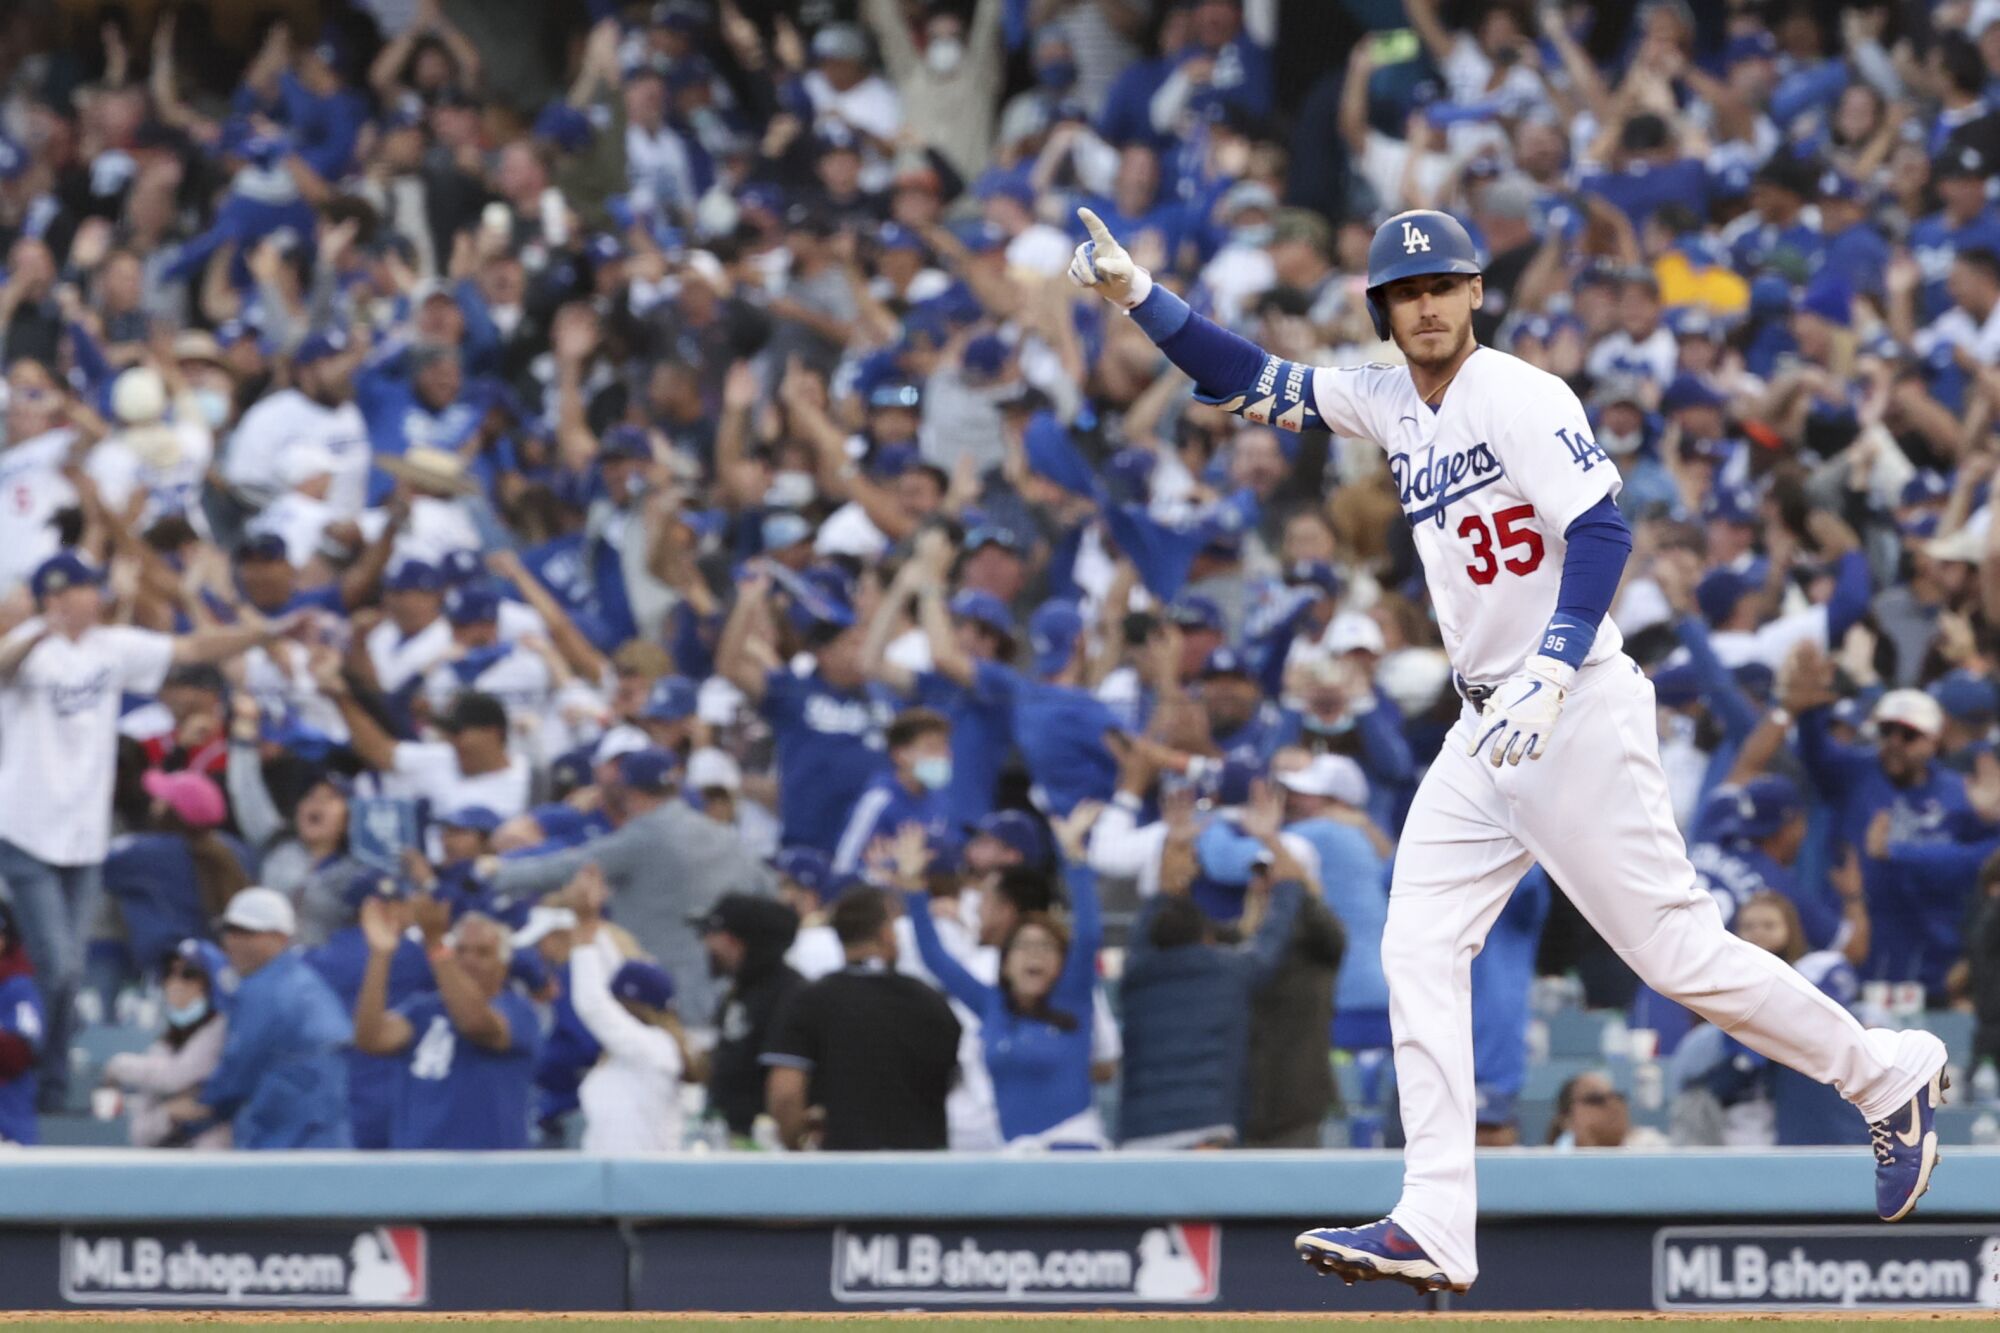 Los Angeles Dodgers' Cody Bellinger celebrates after a three-run home run to tie the score during the eighth inning.